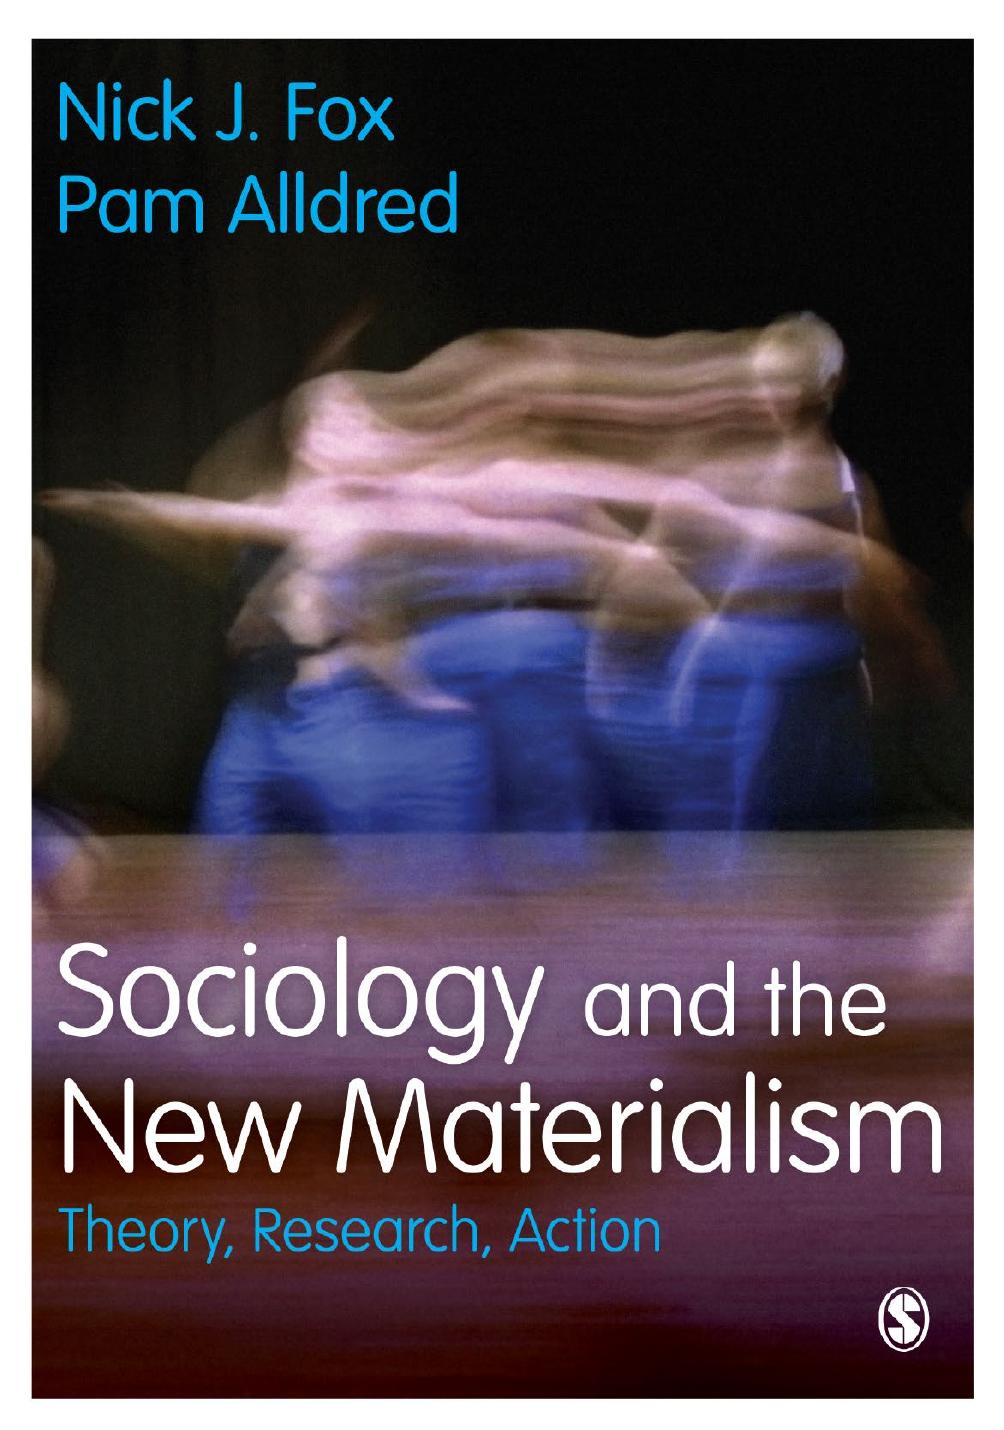 Sociology and the New Materialism:Theory, Research, Action